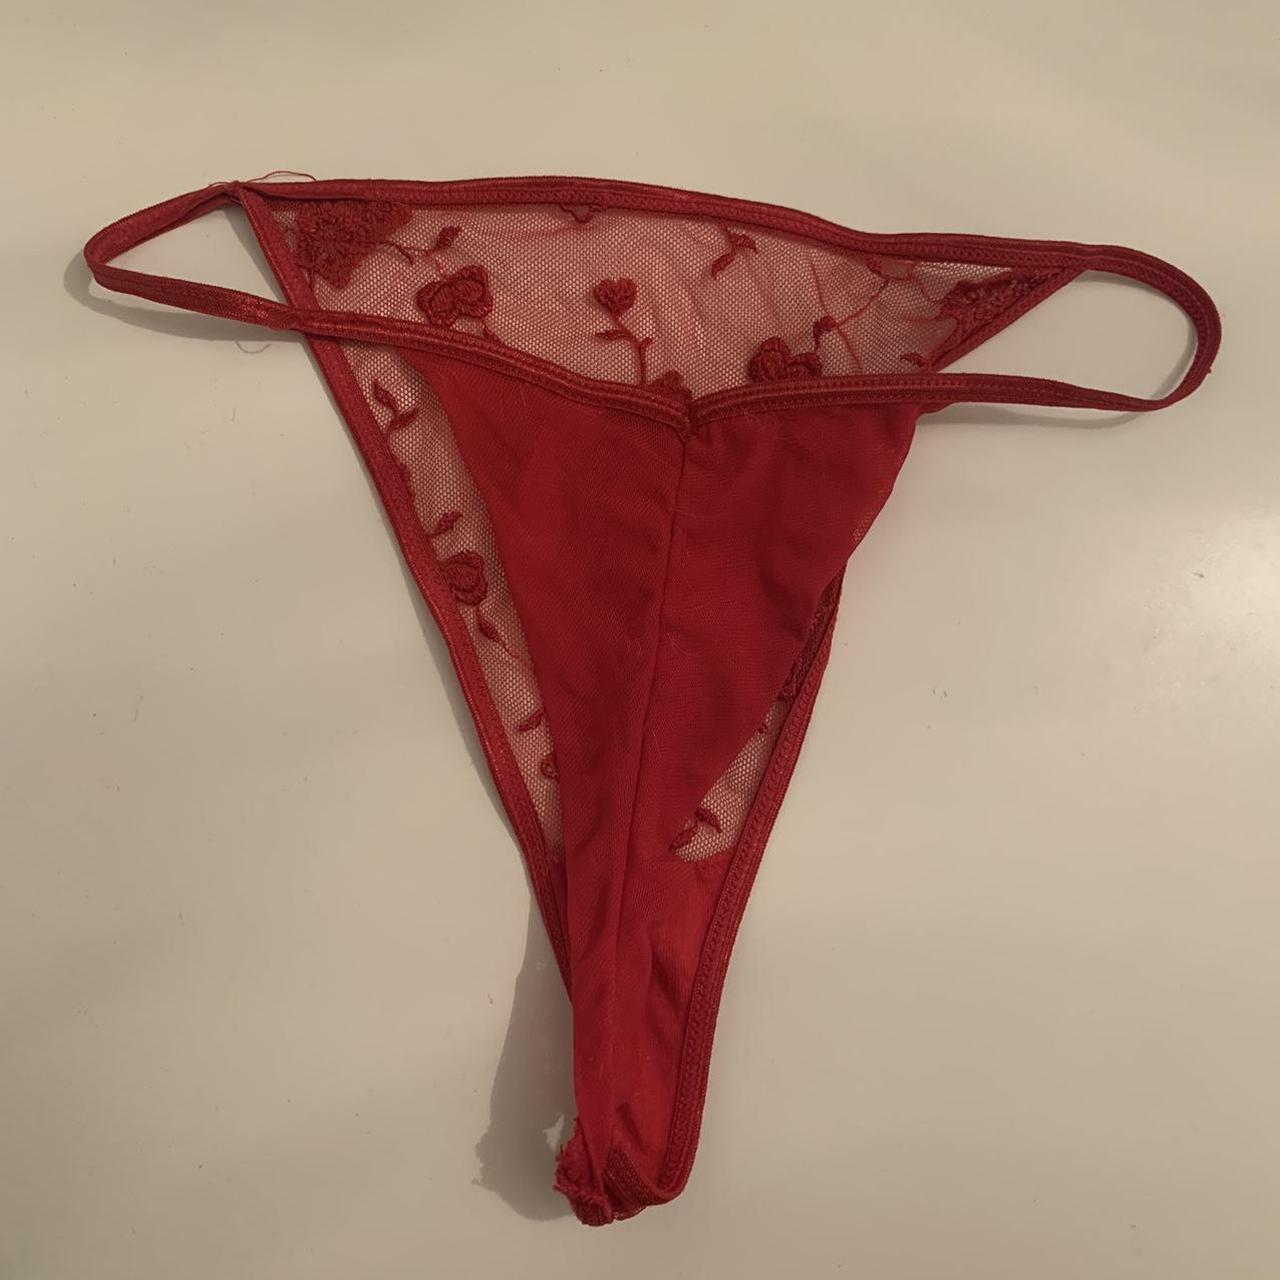 Red g-string thong with mesh, embroidered flower and - Depop